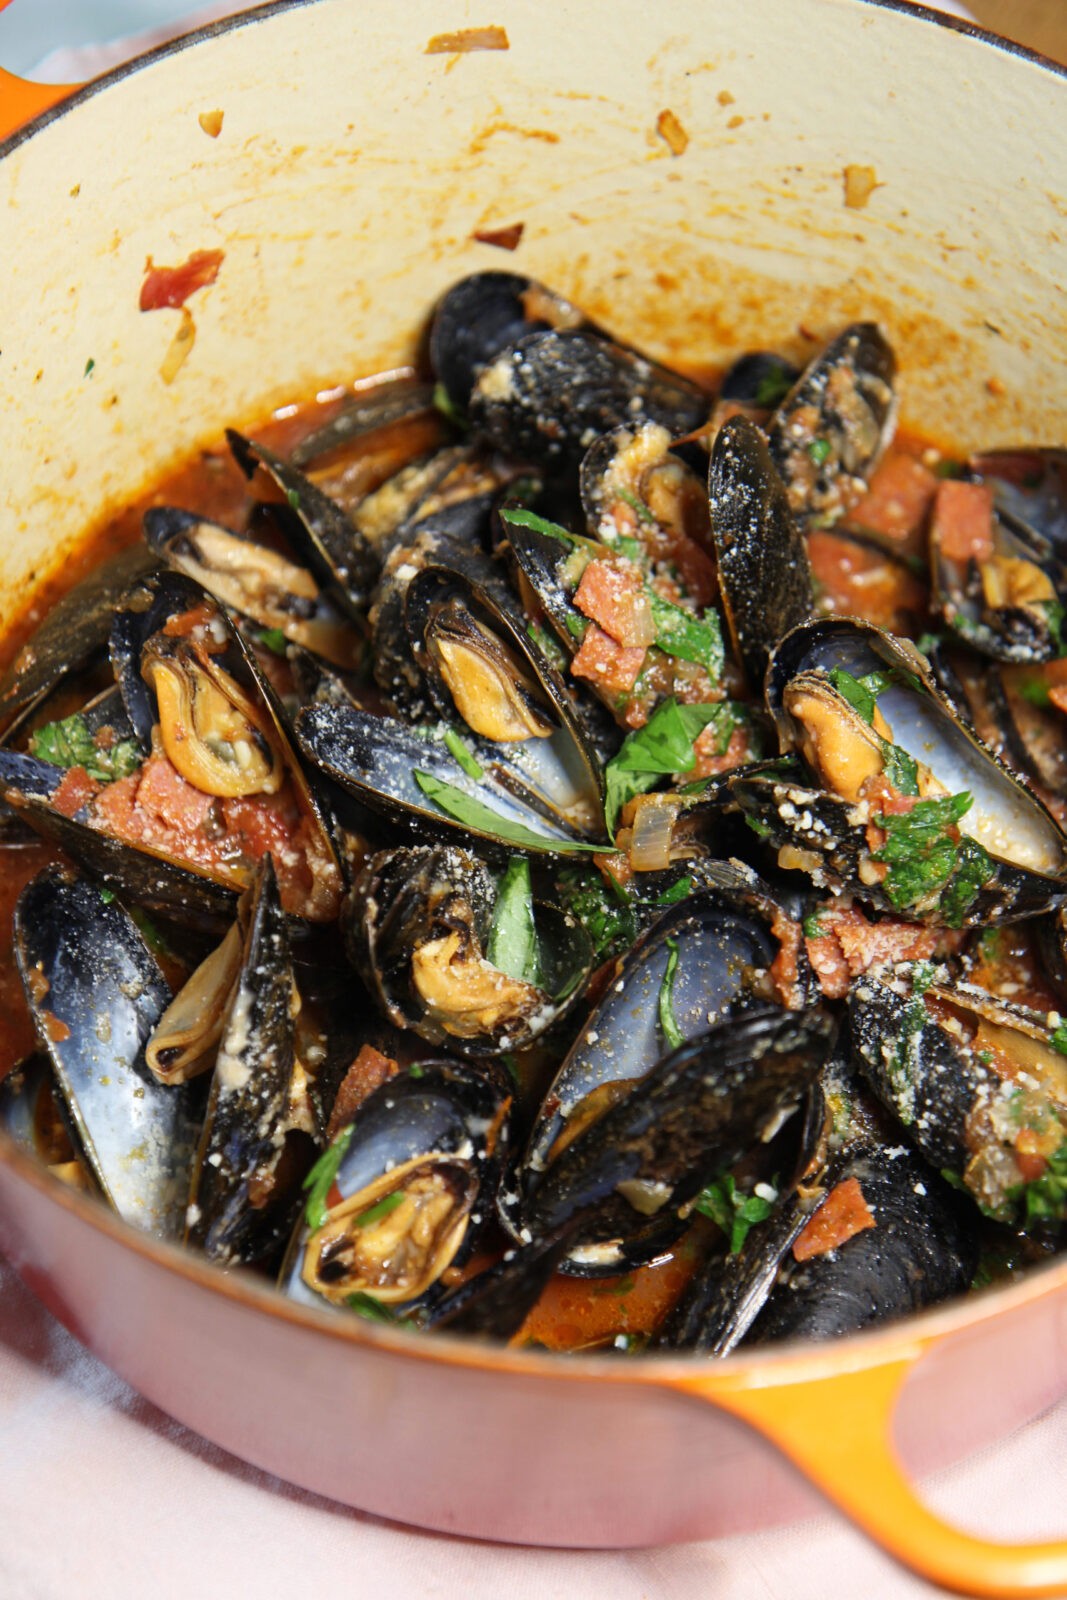 How To Make Pepperoni Pizza Mussels. This is a 15 minutes pizza seafood recipe that is so saucy yum. Grab pepperoni and shallots and sizzle in the pan with mussels, Parm and Italian herbs. Happy Cooking! www.ChopHappy.com #mussels #howtomakeMussles